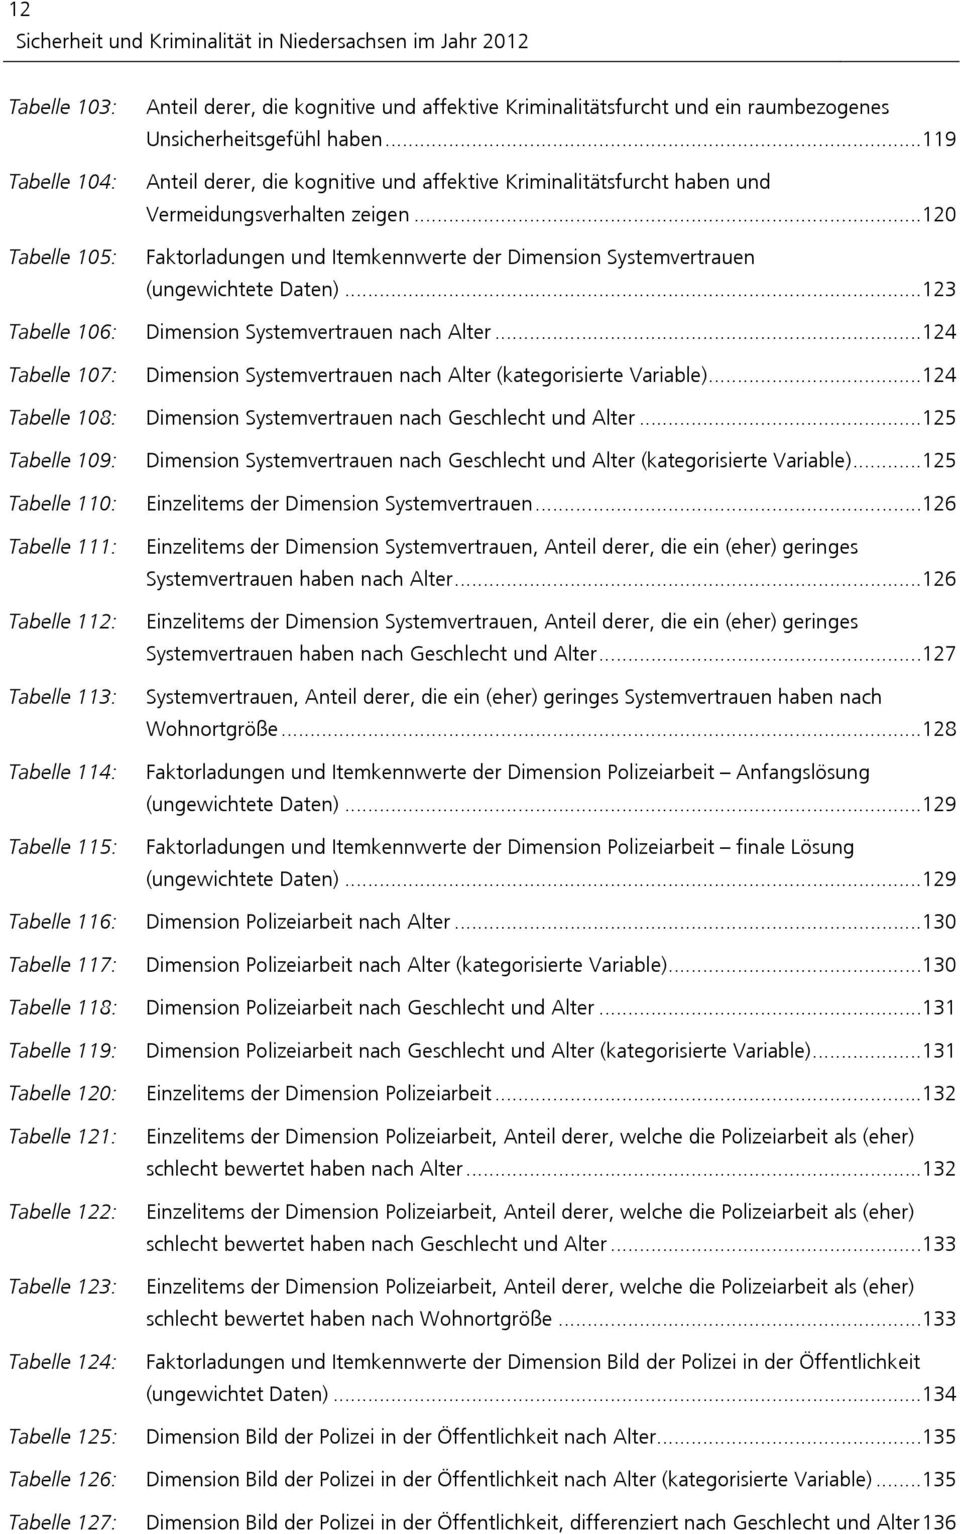 ..123 Tabelle 106: Dimension Systemvertrauen nach Alter...124 Tabelle 107: Dimension Systemvertrauen nach Alter (kategorisierte Variable).